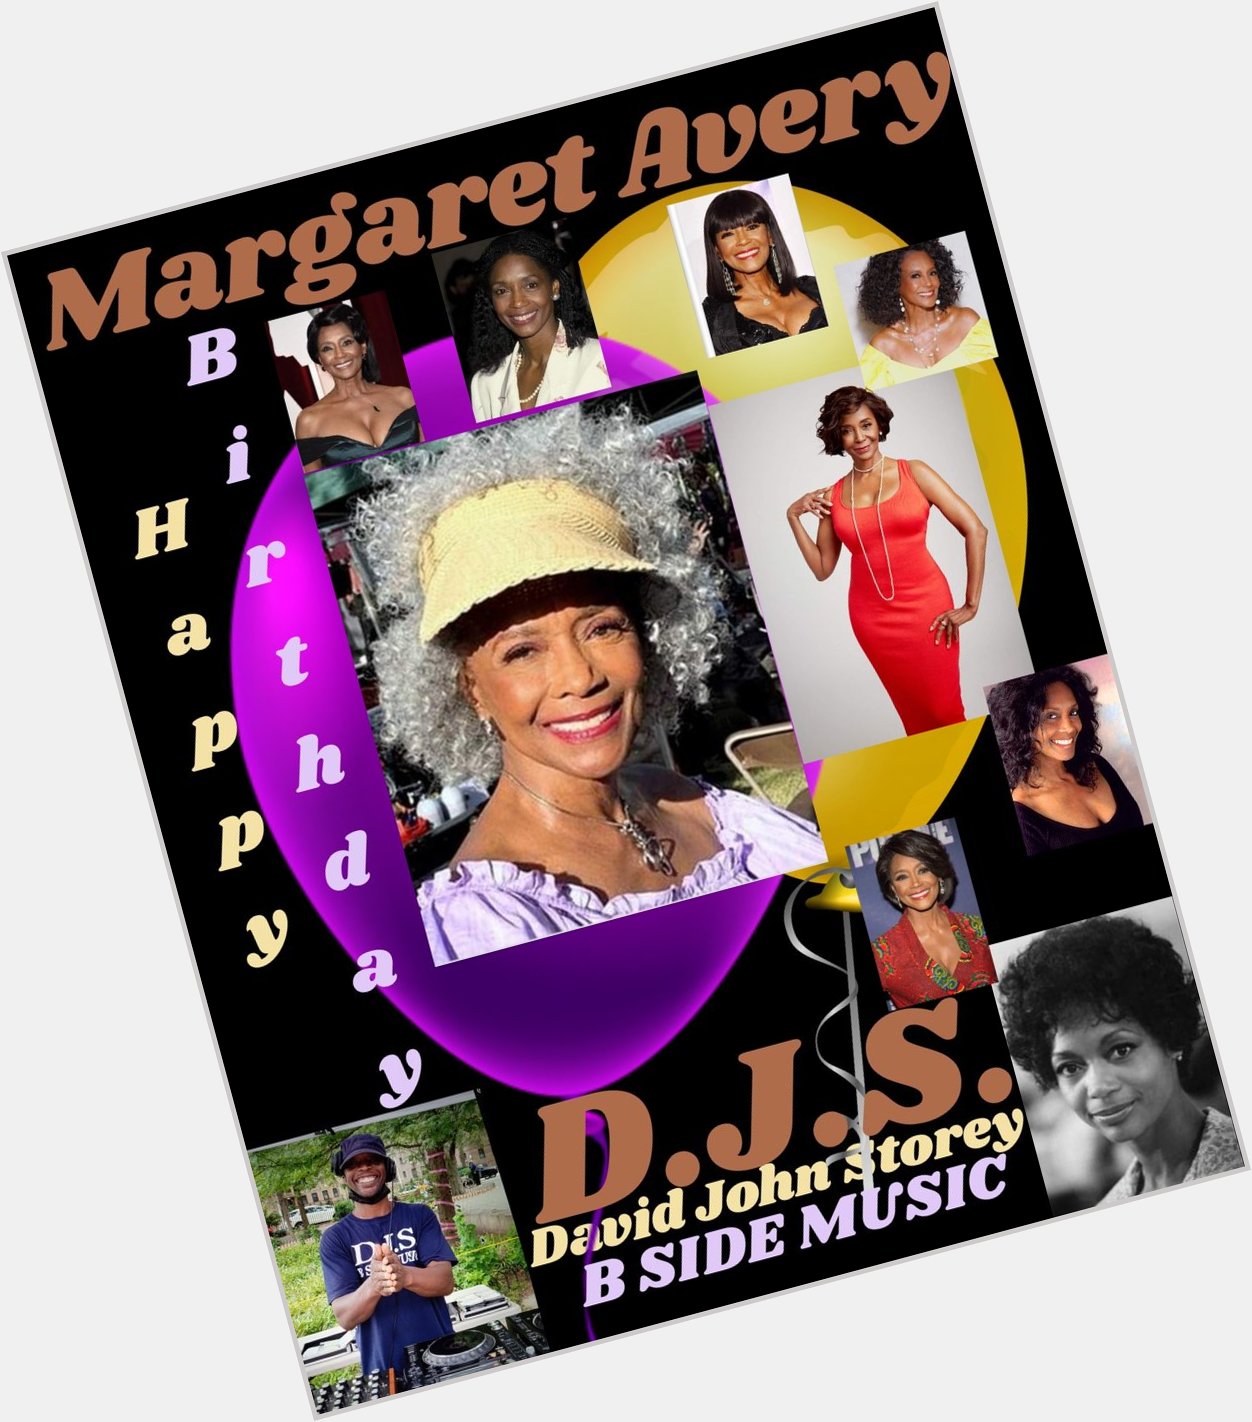 I(D.J.S.)\"B SIDE NY\" taking time to wish Actress: \"MARGARET AVERY\" Happy Belated Birthday. 